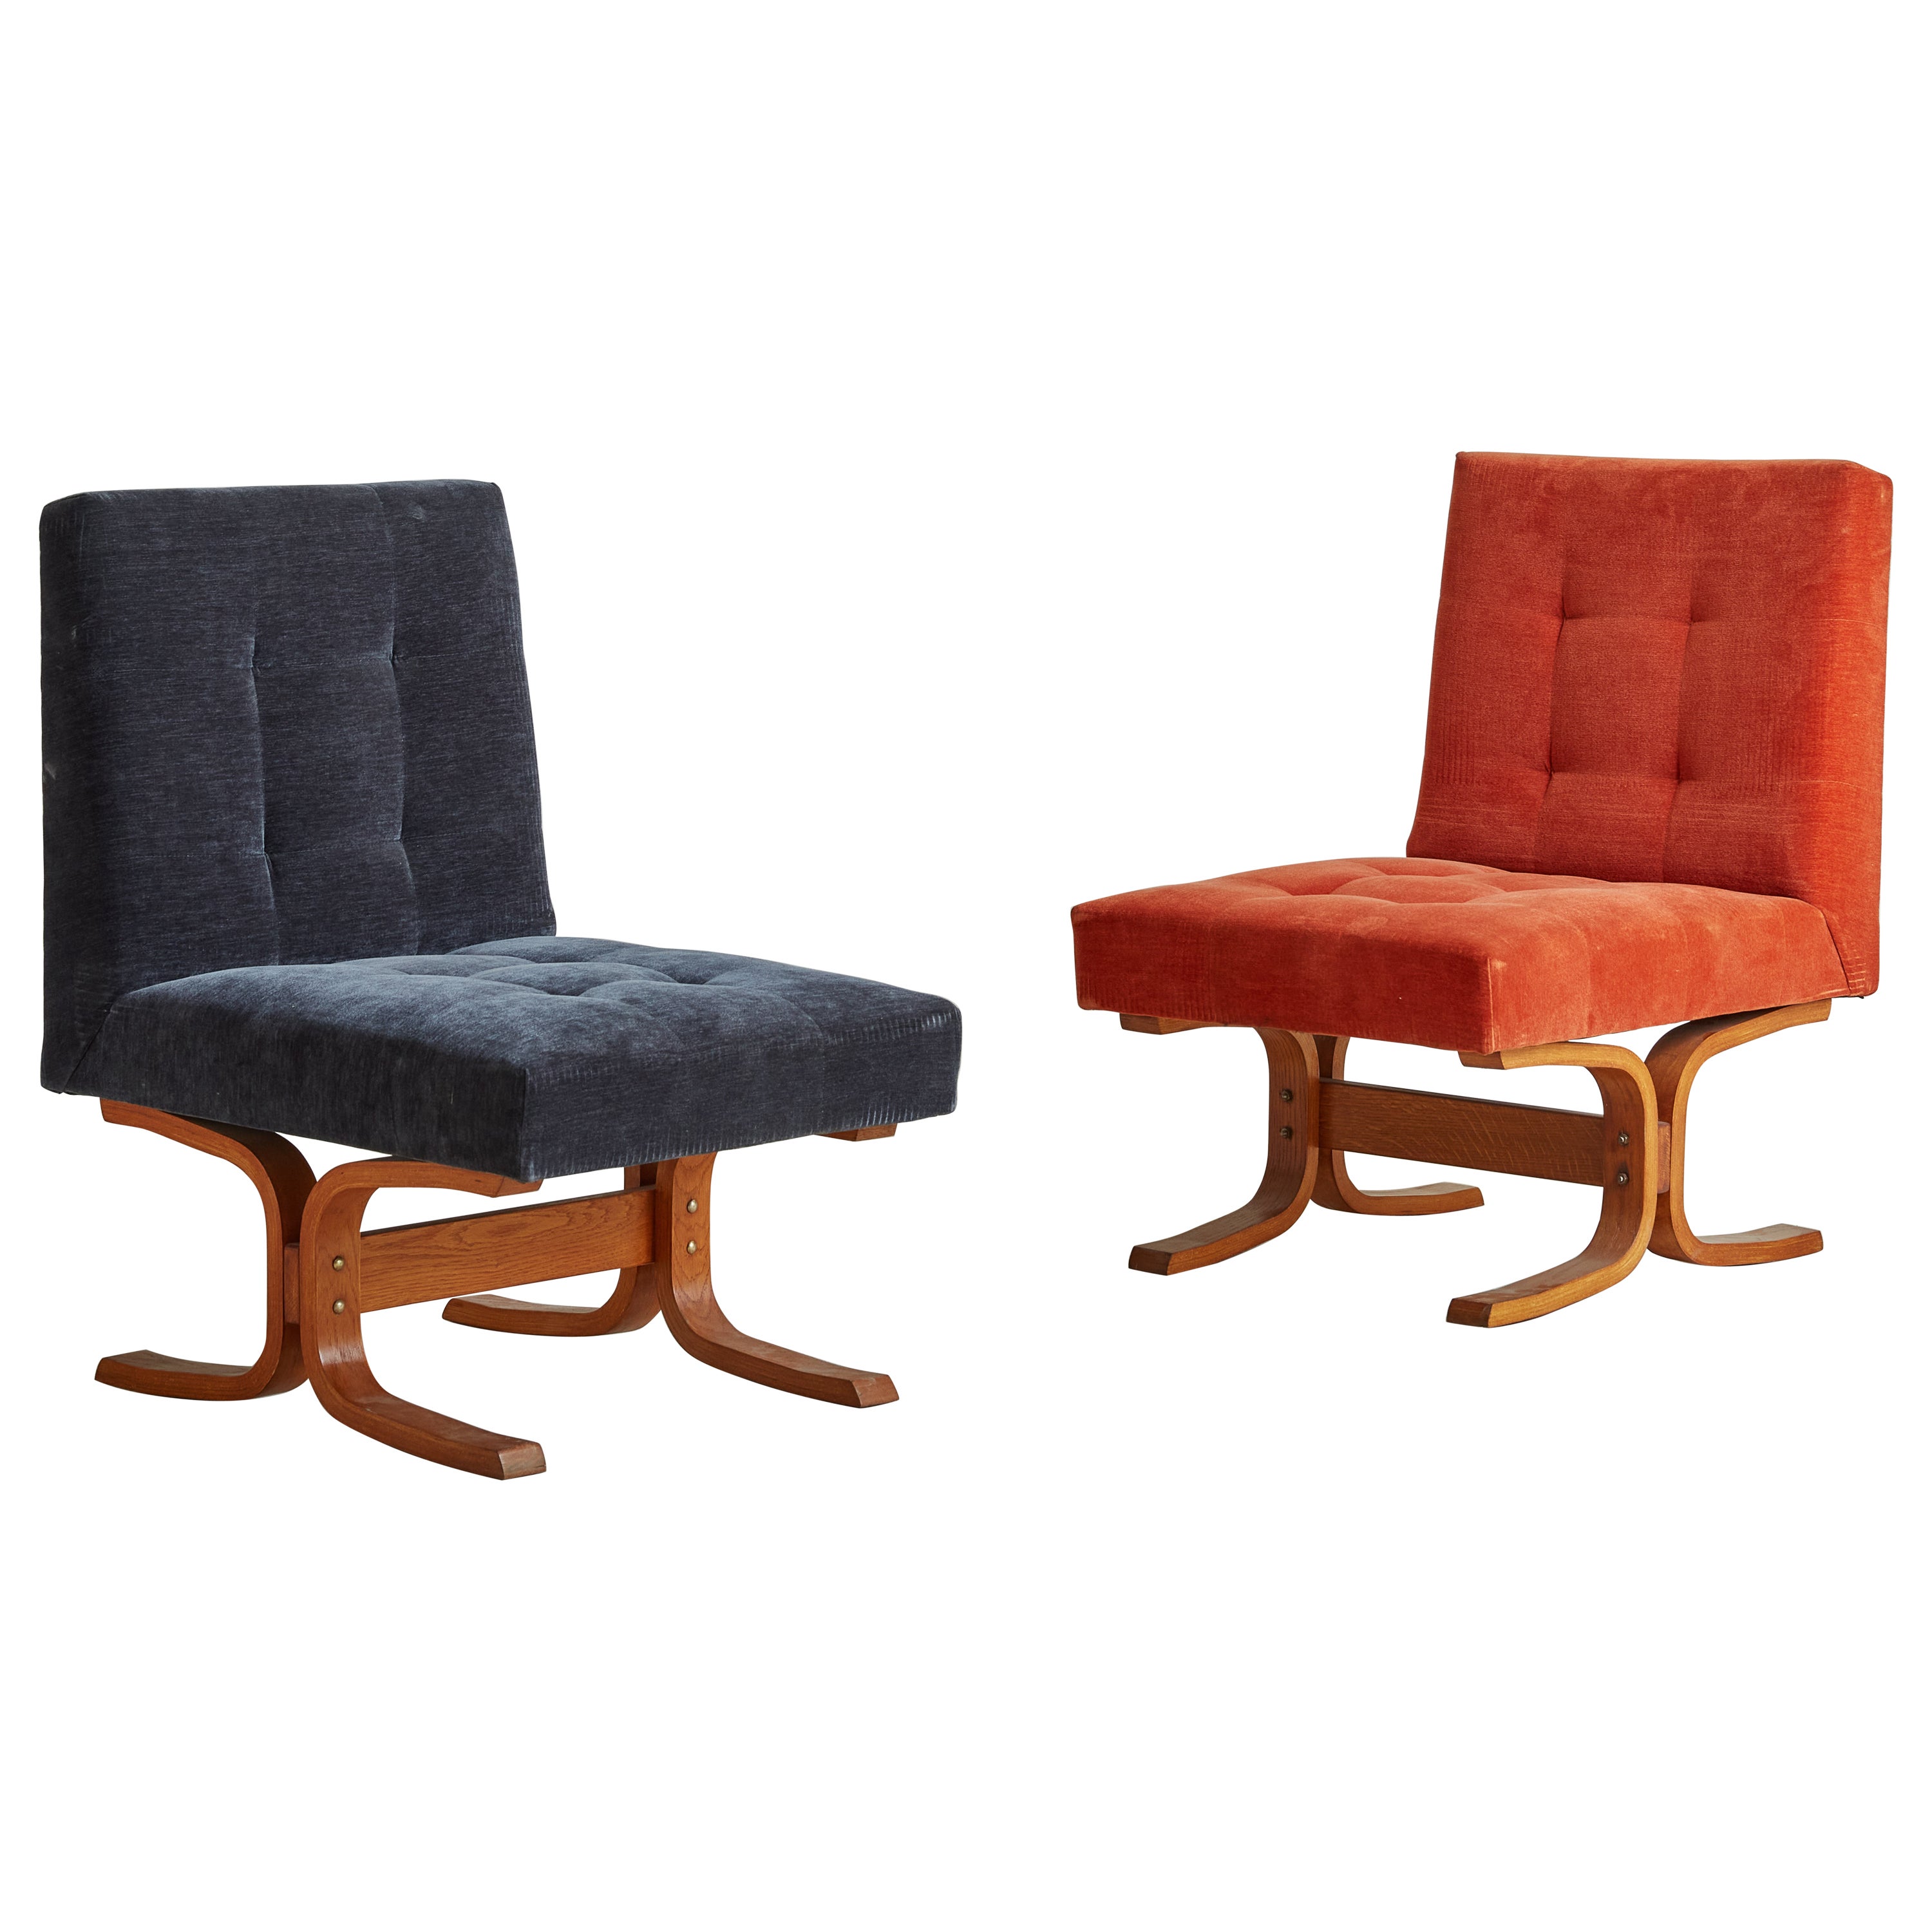 Bratislava Lounge Chairs by Jindrich Volak for Drevopodnik Holesov - 2 Available For Sale